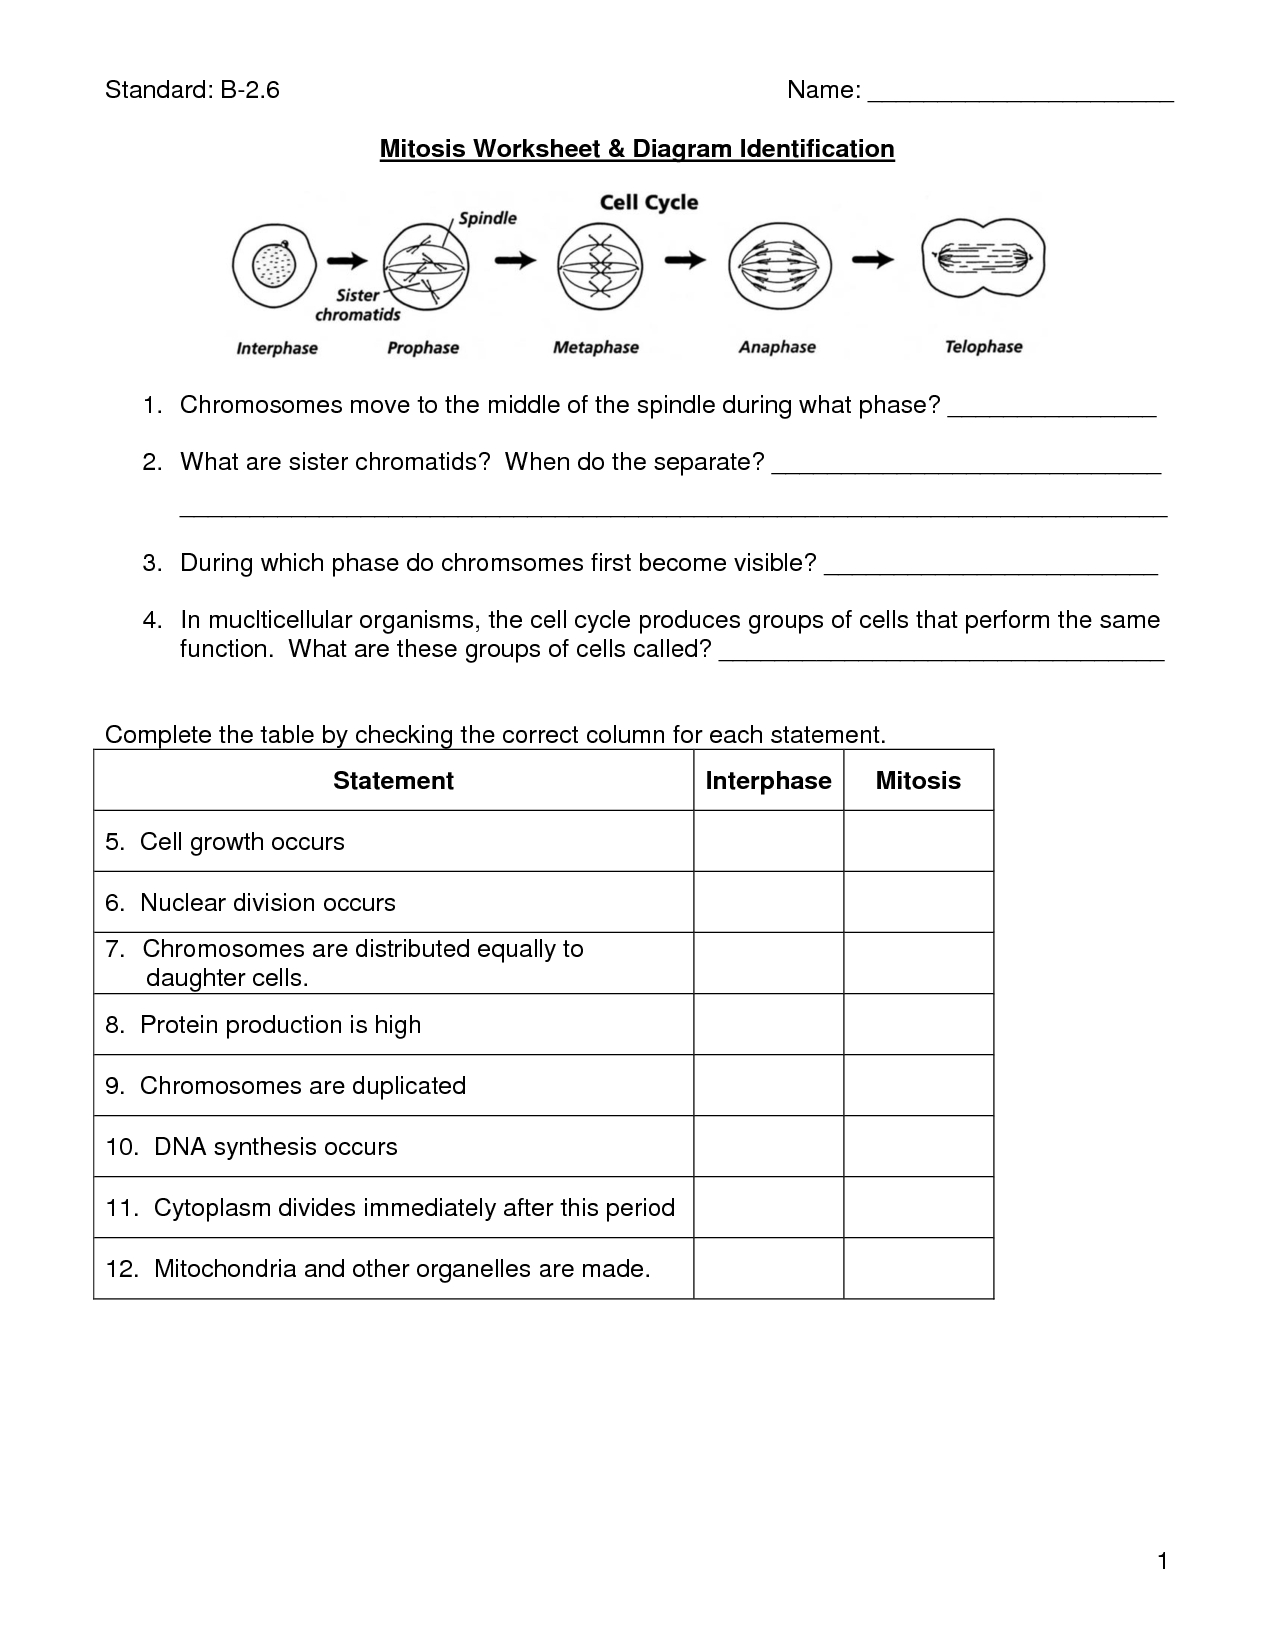 Mitosis Worksheet | Cells, Photosynthesis, Mitosis | Biology - Free Printable Biology Worksheets For High School